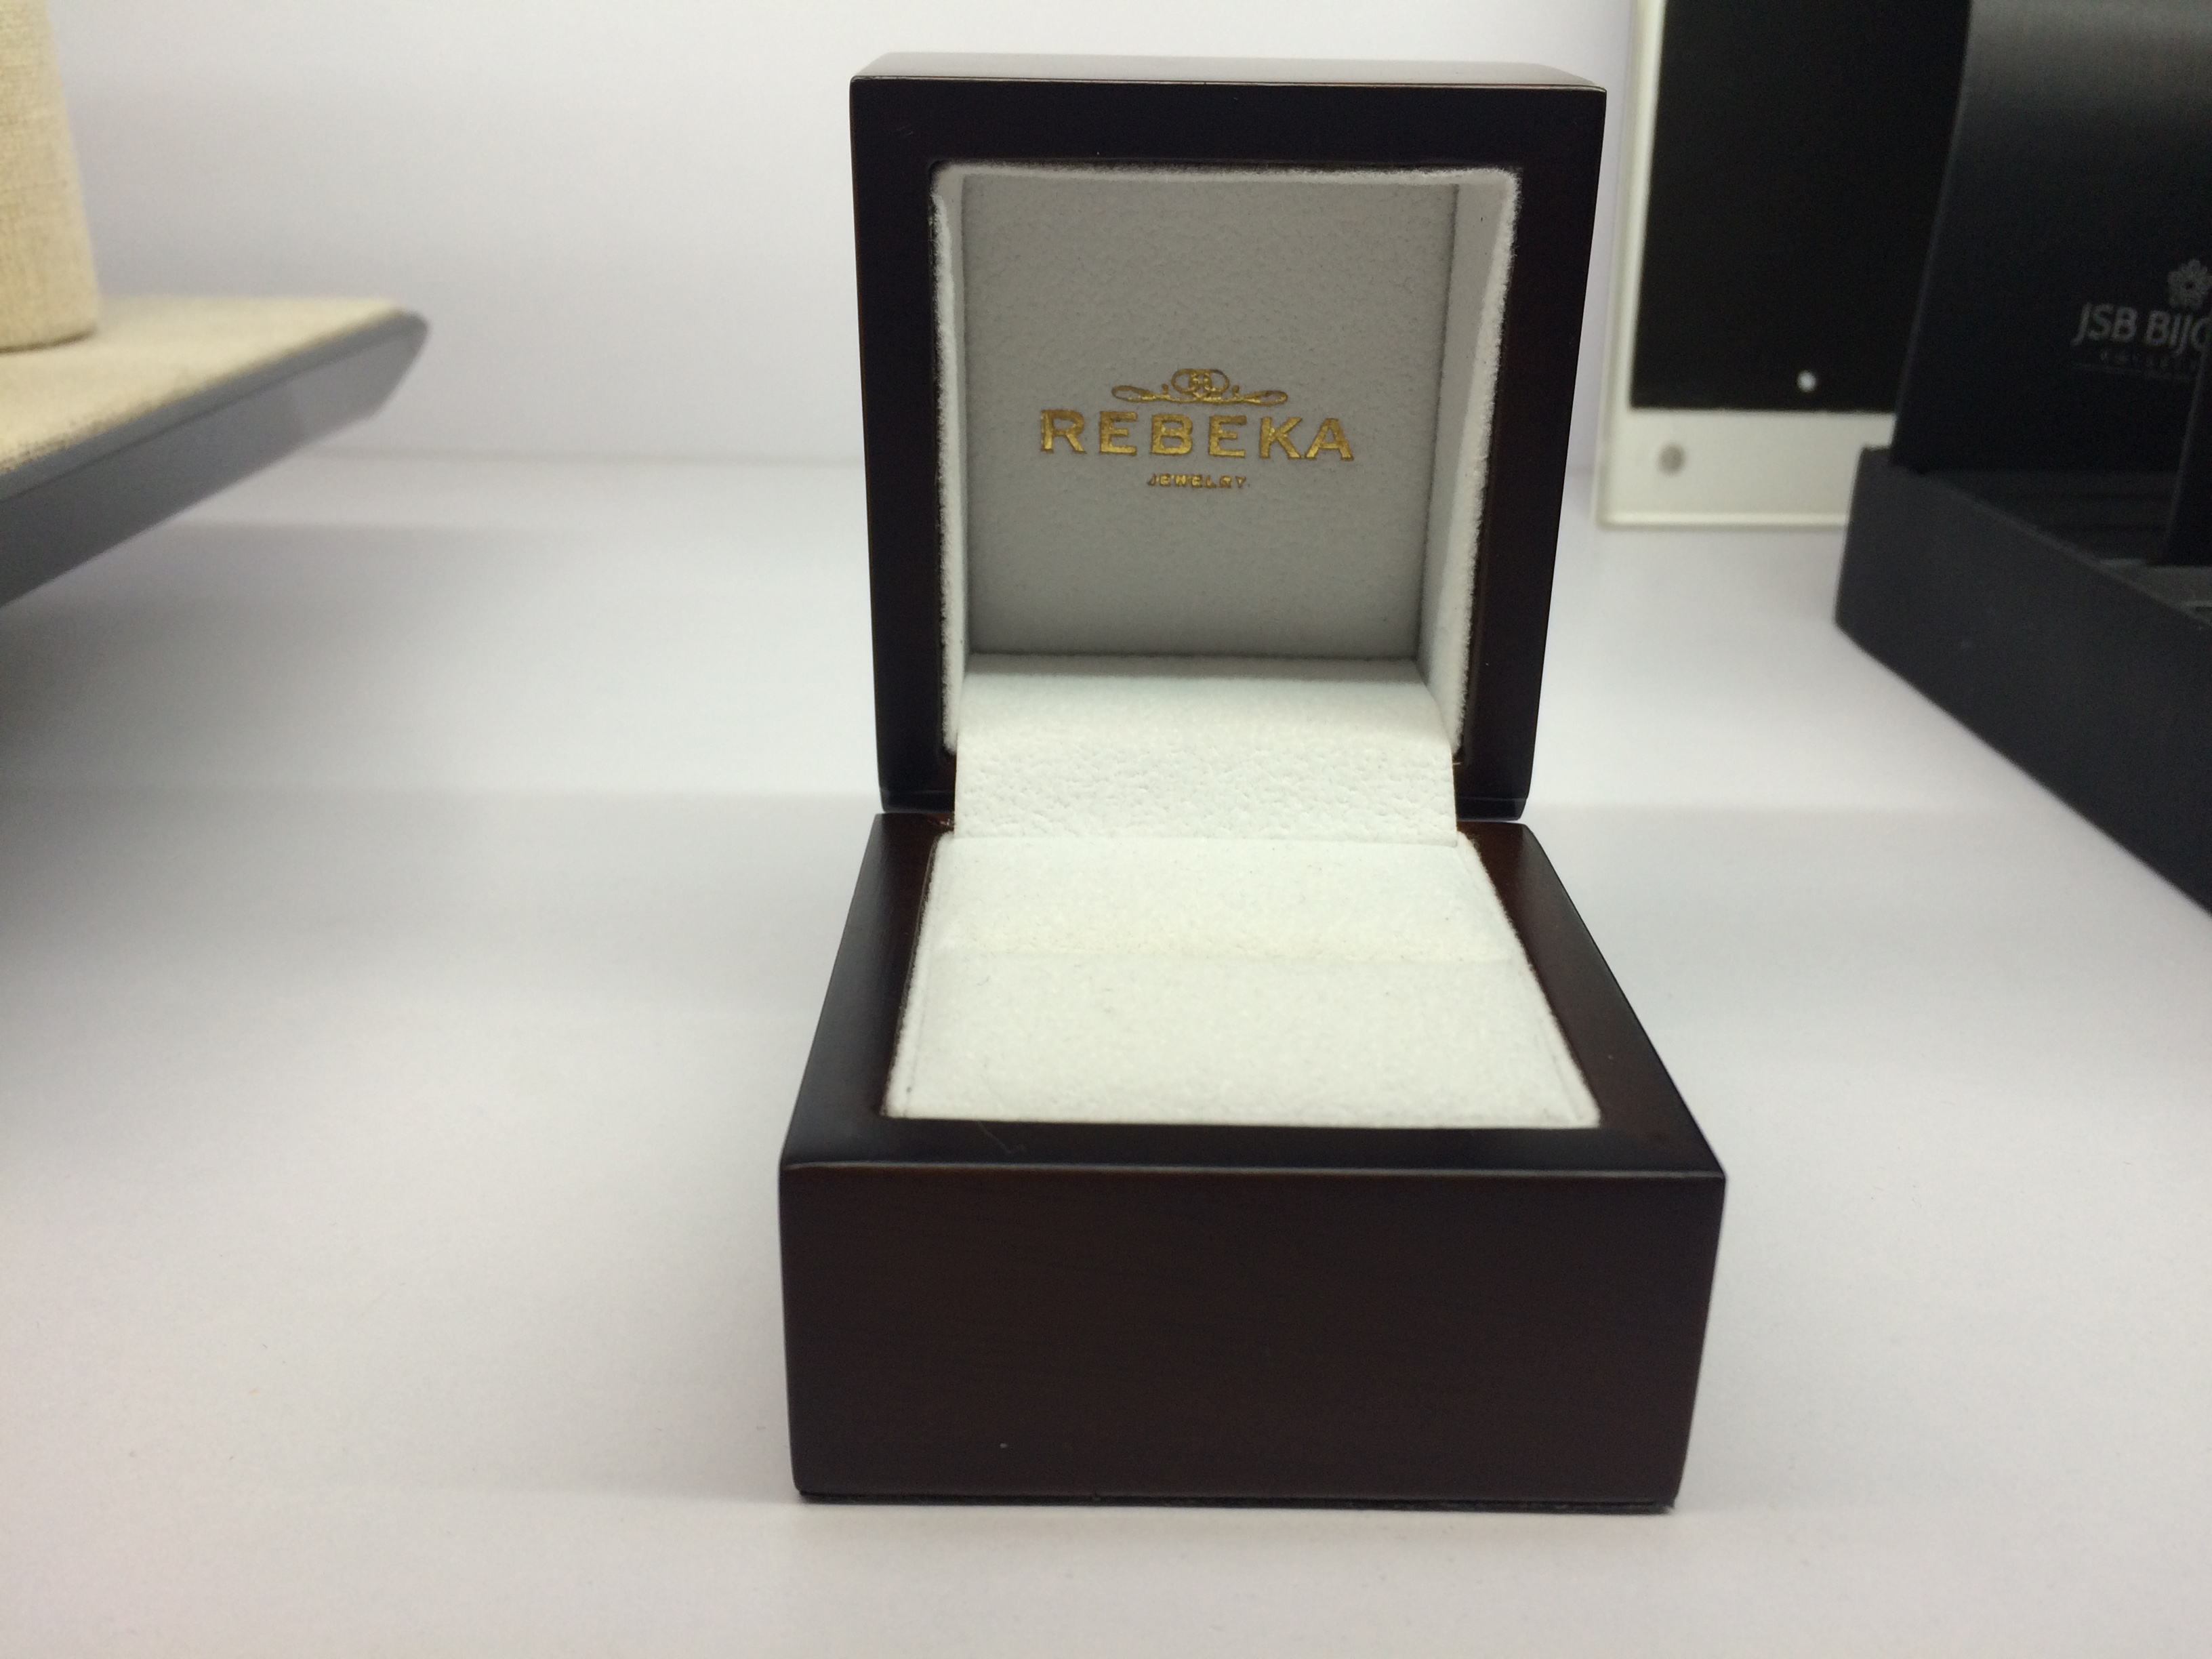 Antique classic wooden ring box with silver and glod printing logo made of high quality wood as beautiful as collections